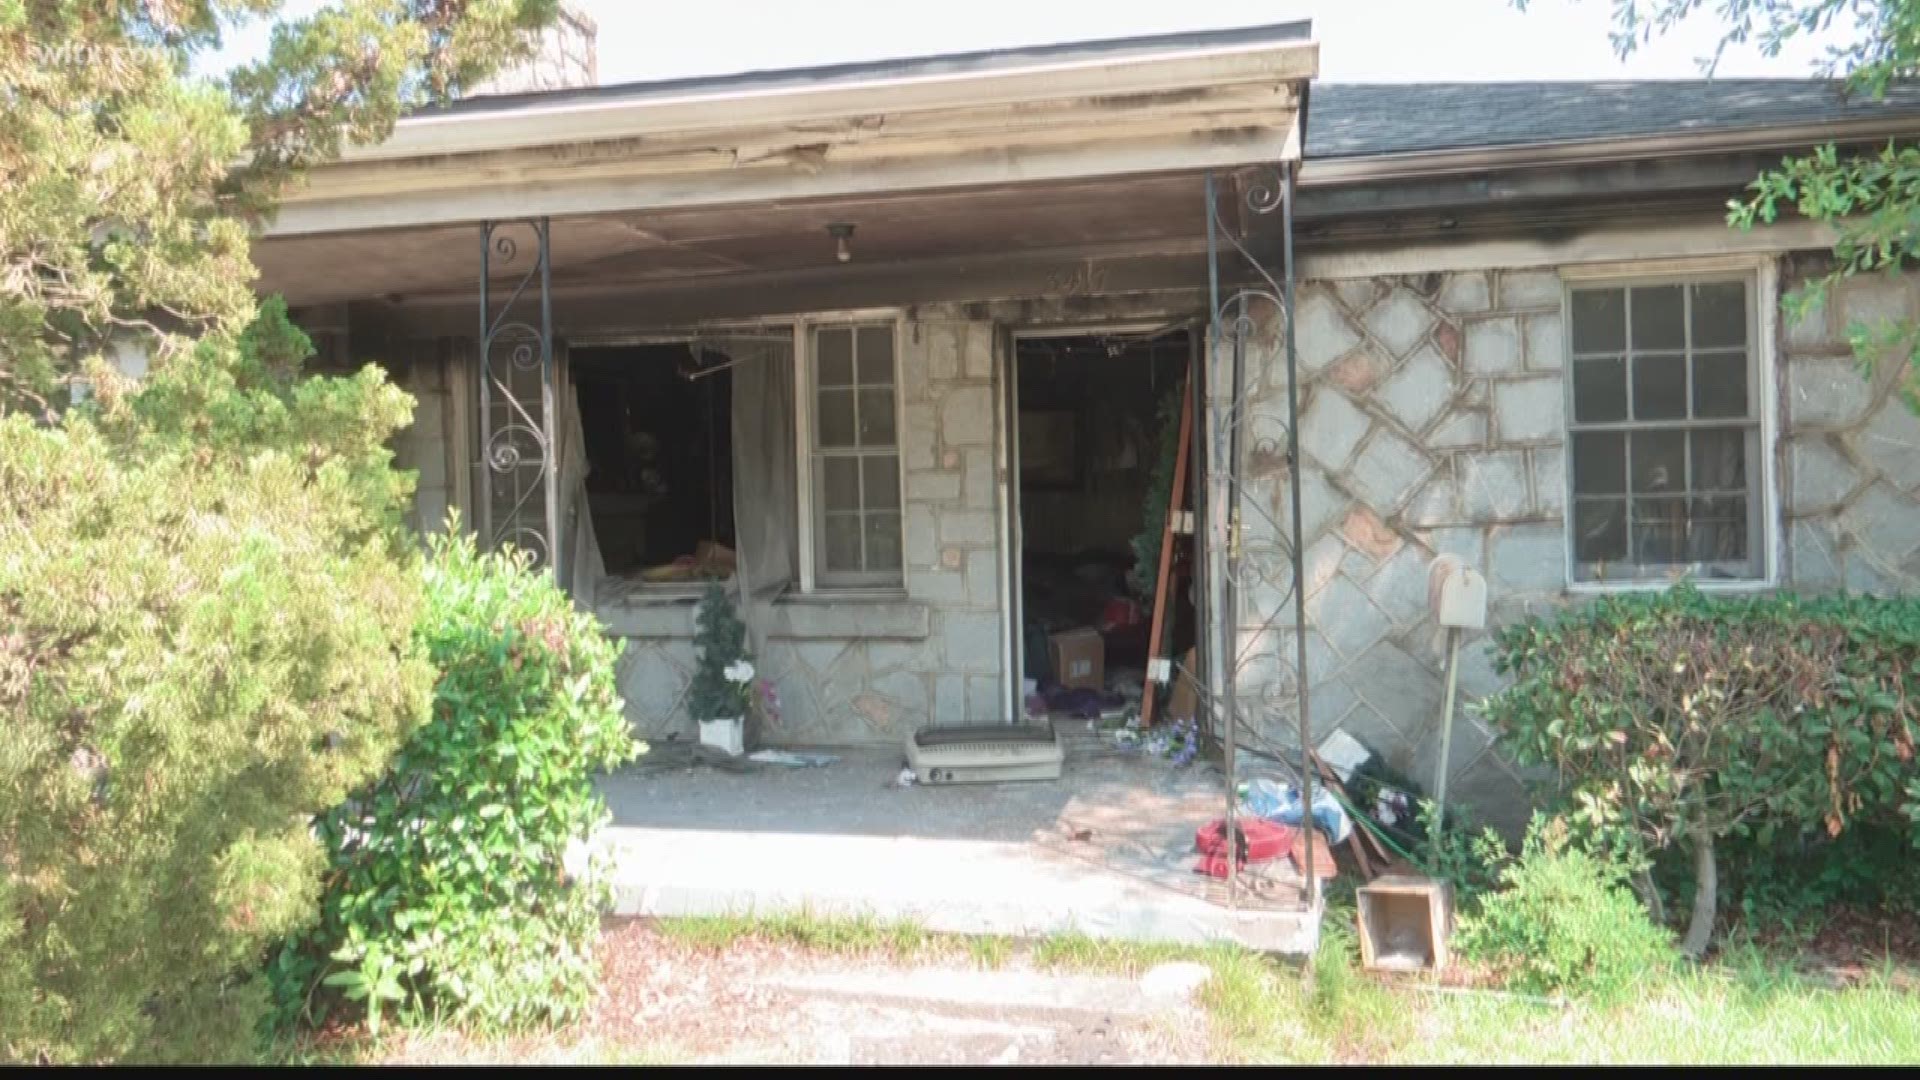 The Columbia Fire department is looking for a cause in a "suspicious" house fire that happened overnight.   One woman was found dead inside and has been identified as Francena Willingham, 68 